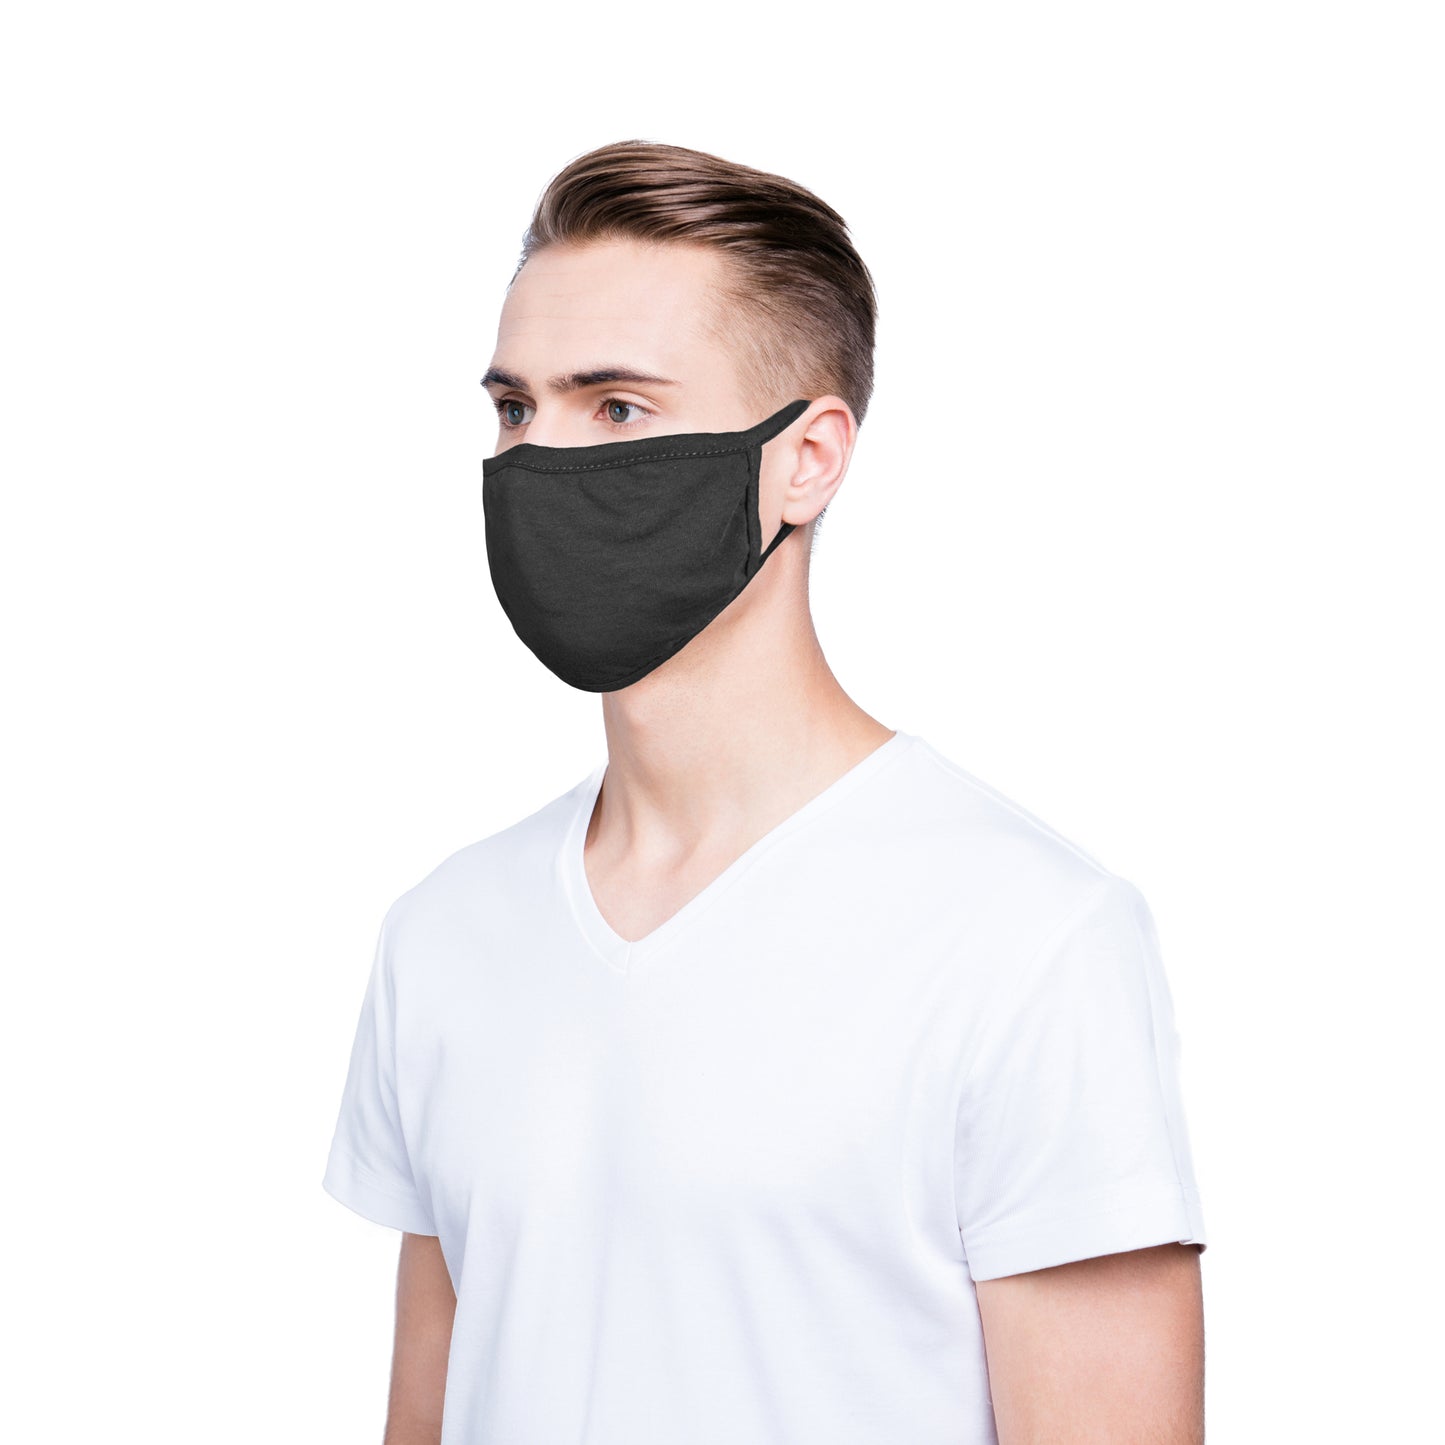 DALIX 5 Pack Premium Cotton Mask Reuseable Washable Made in USA (Black, White)